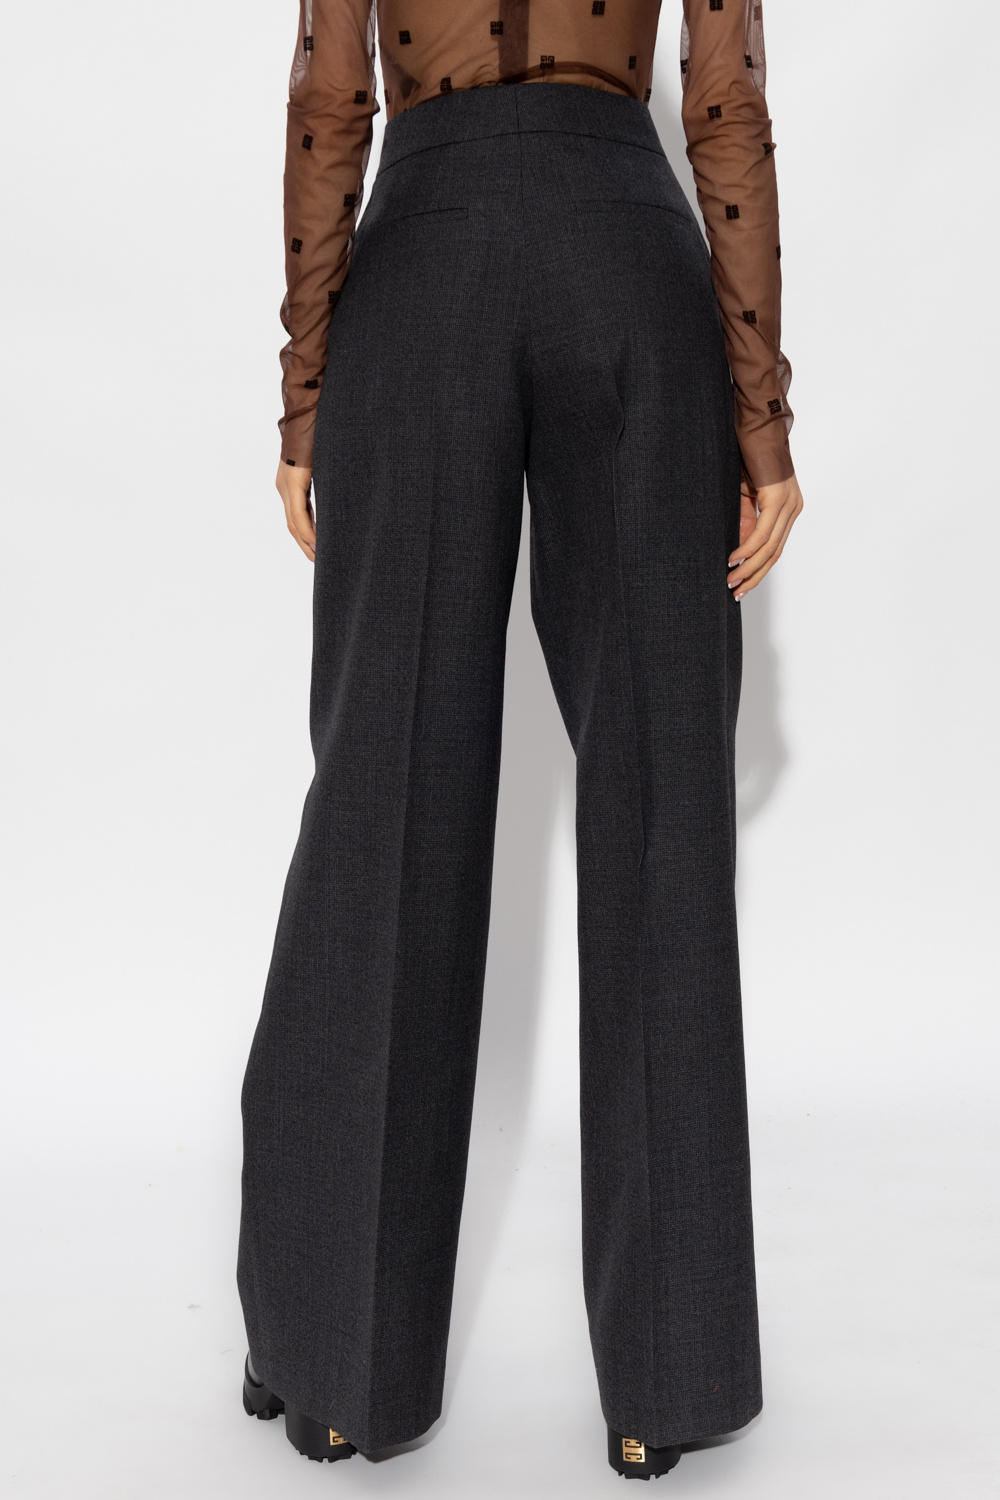 Givenchy Wool pleat-front Twilight trousers